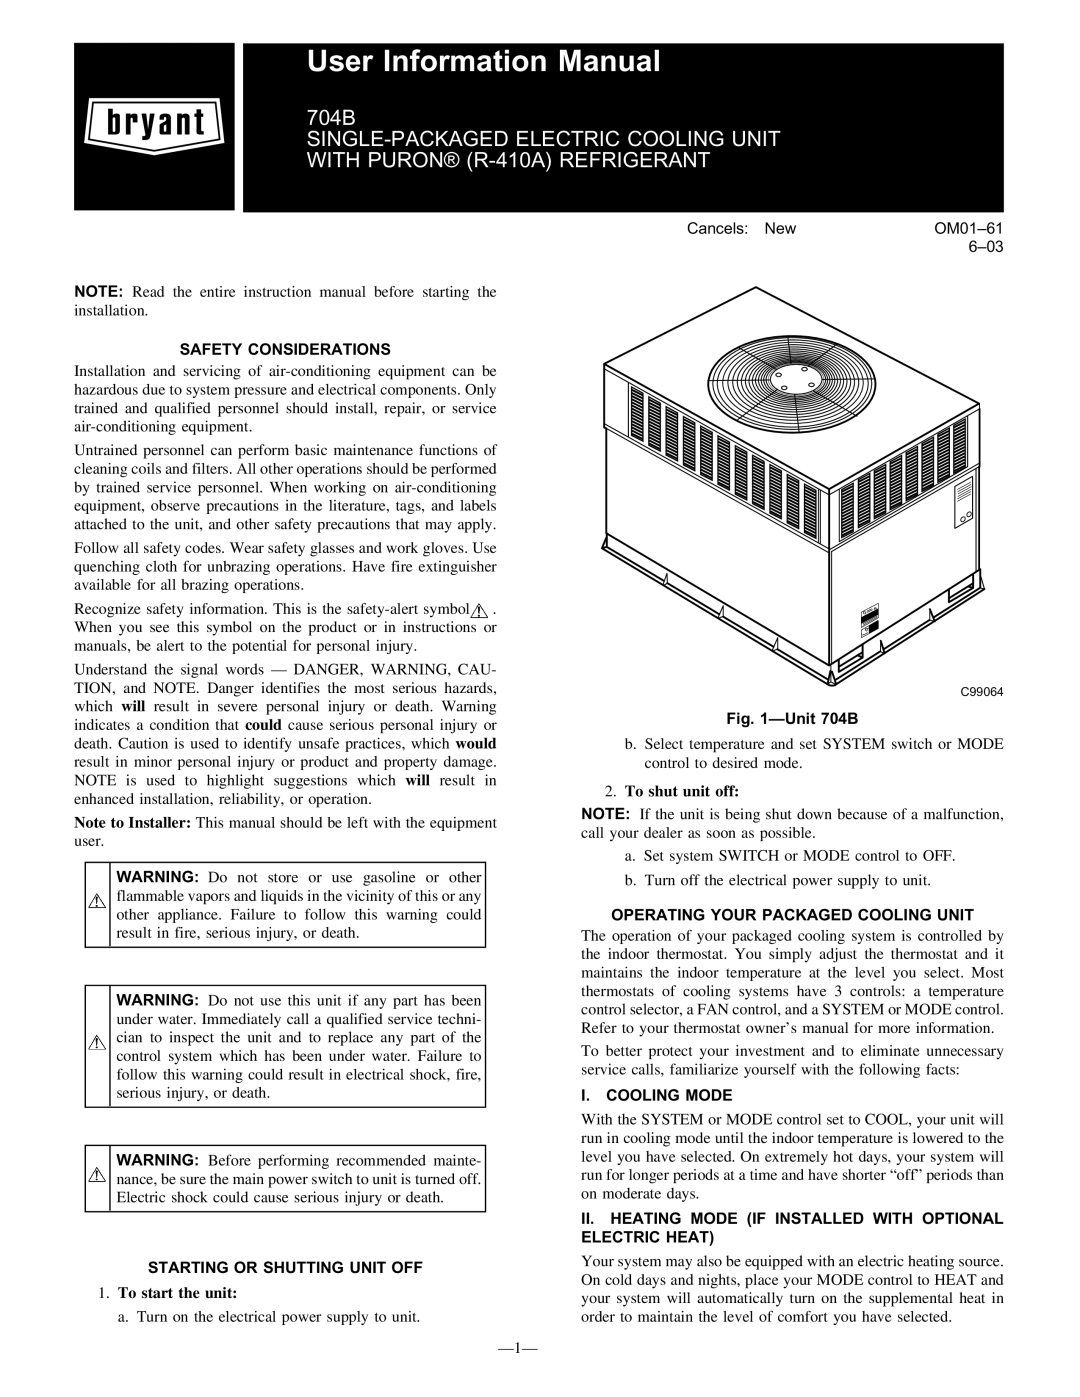 Bryant instruction manual User Information Manual, Safety Considerations, Starting Or Shutting Unit Off, Unit704B 